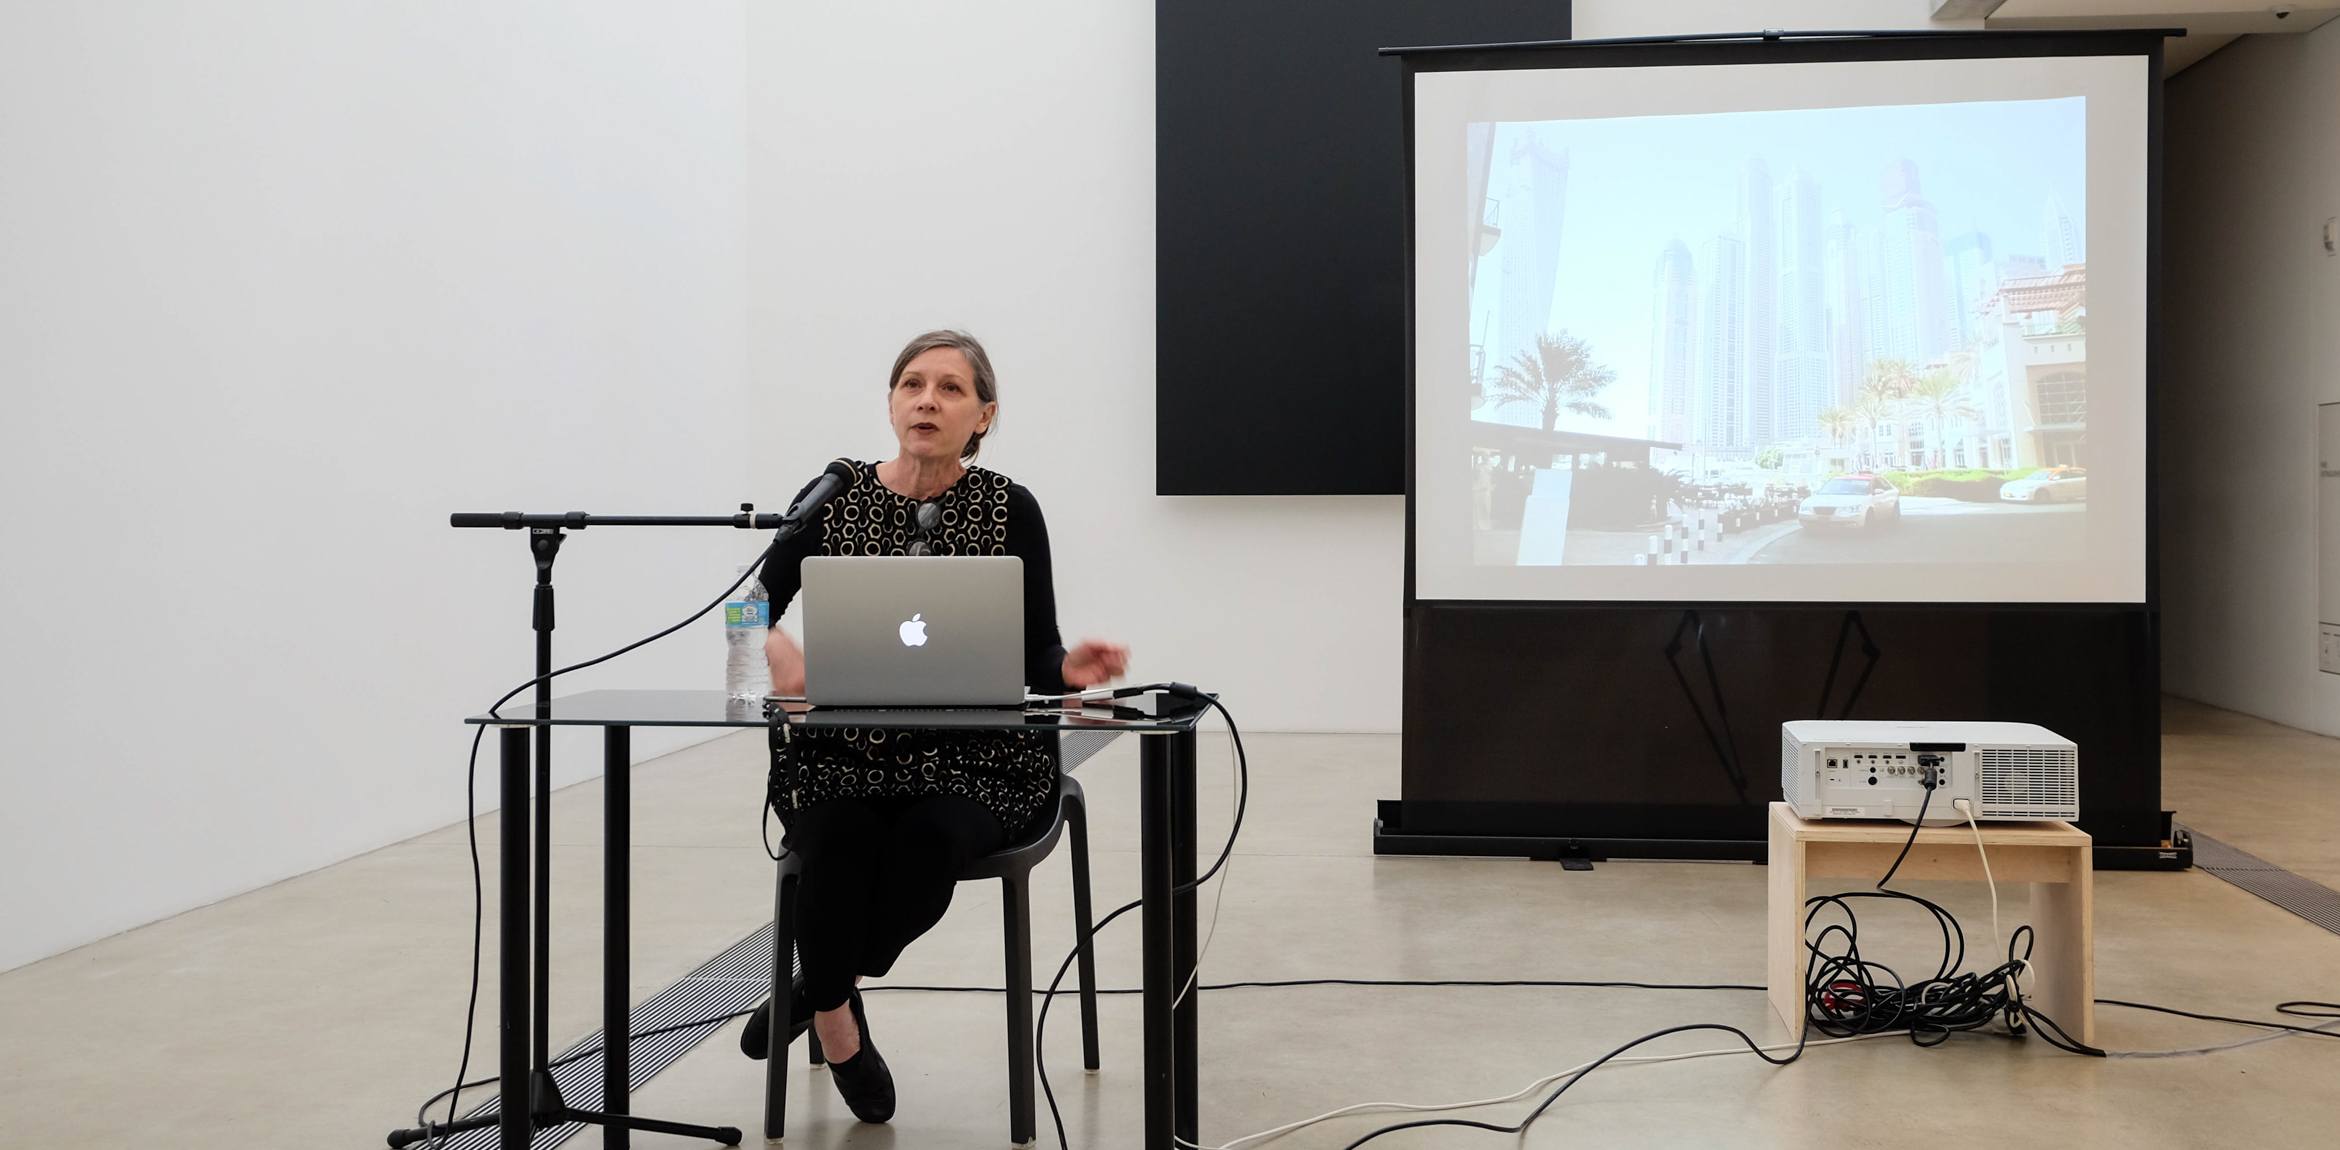 Keller Easterling sits at a small table with her laptop in front of Ellsworth Kelly's 